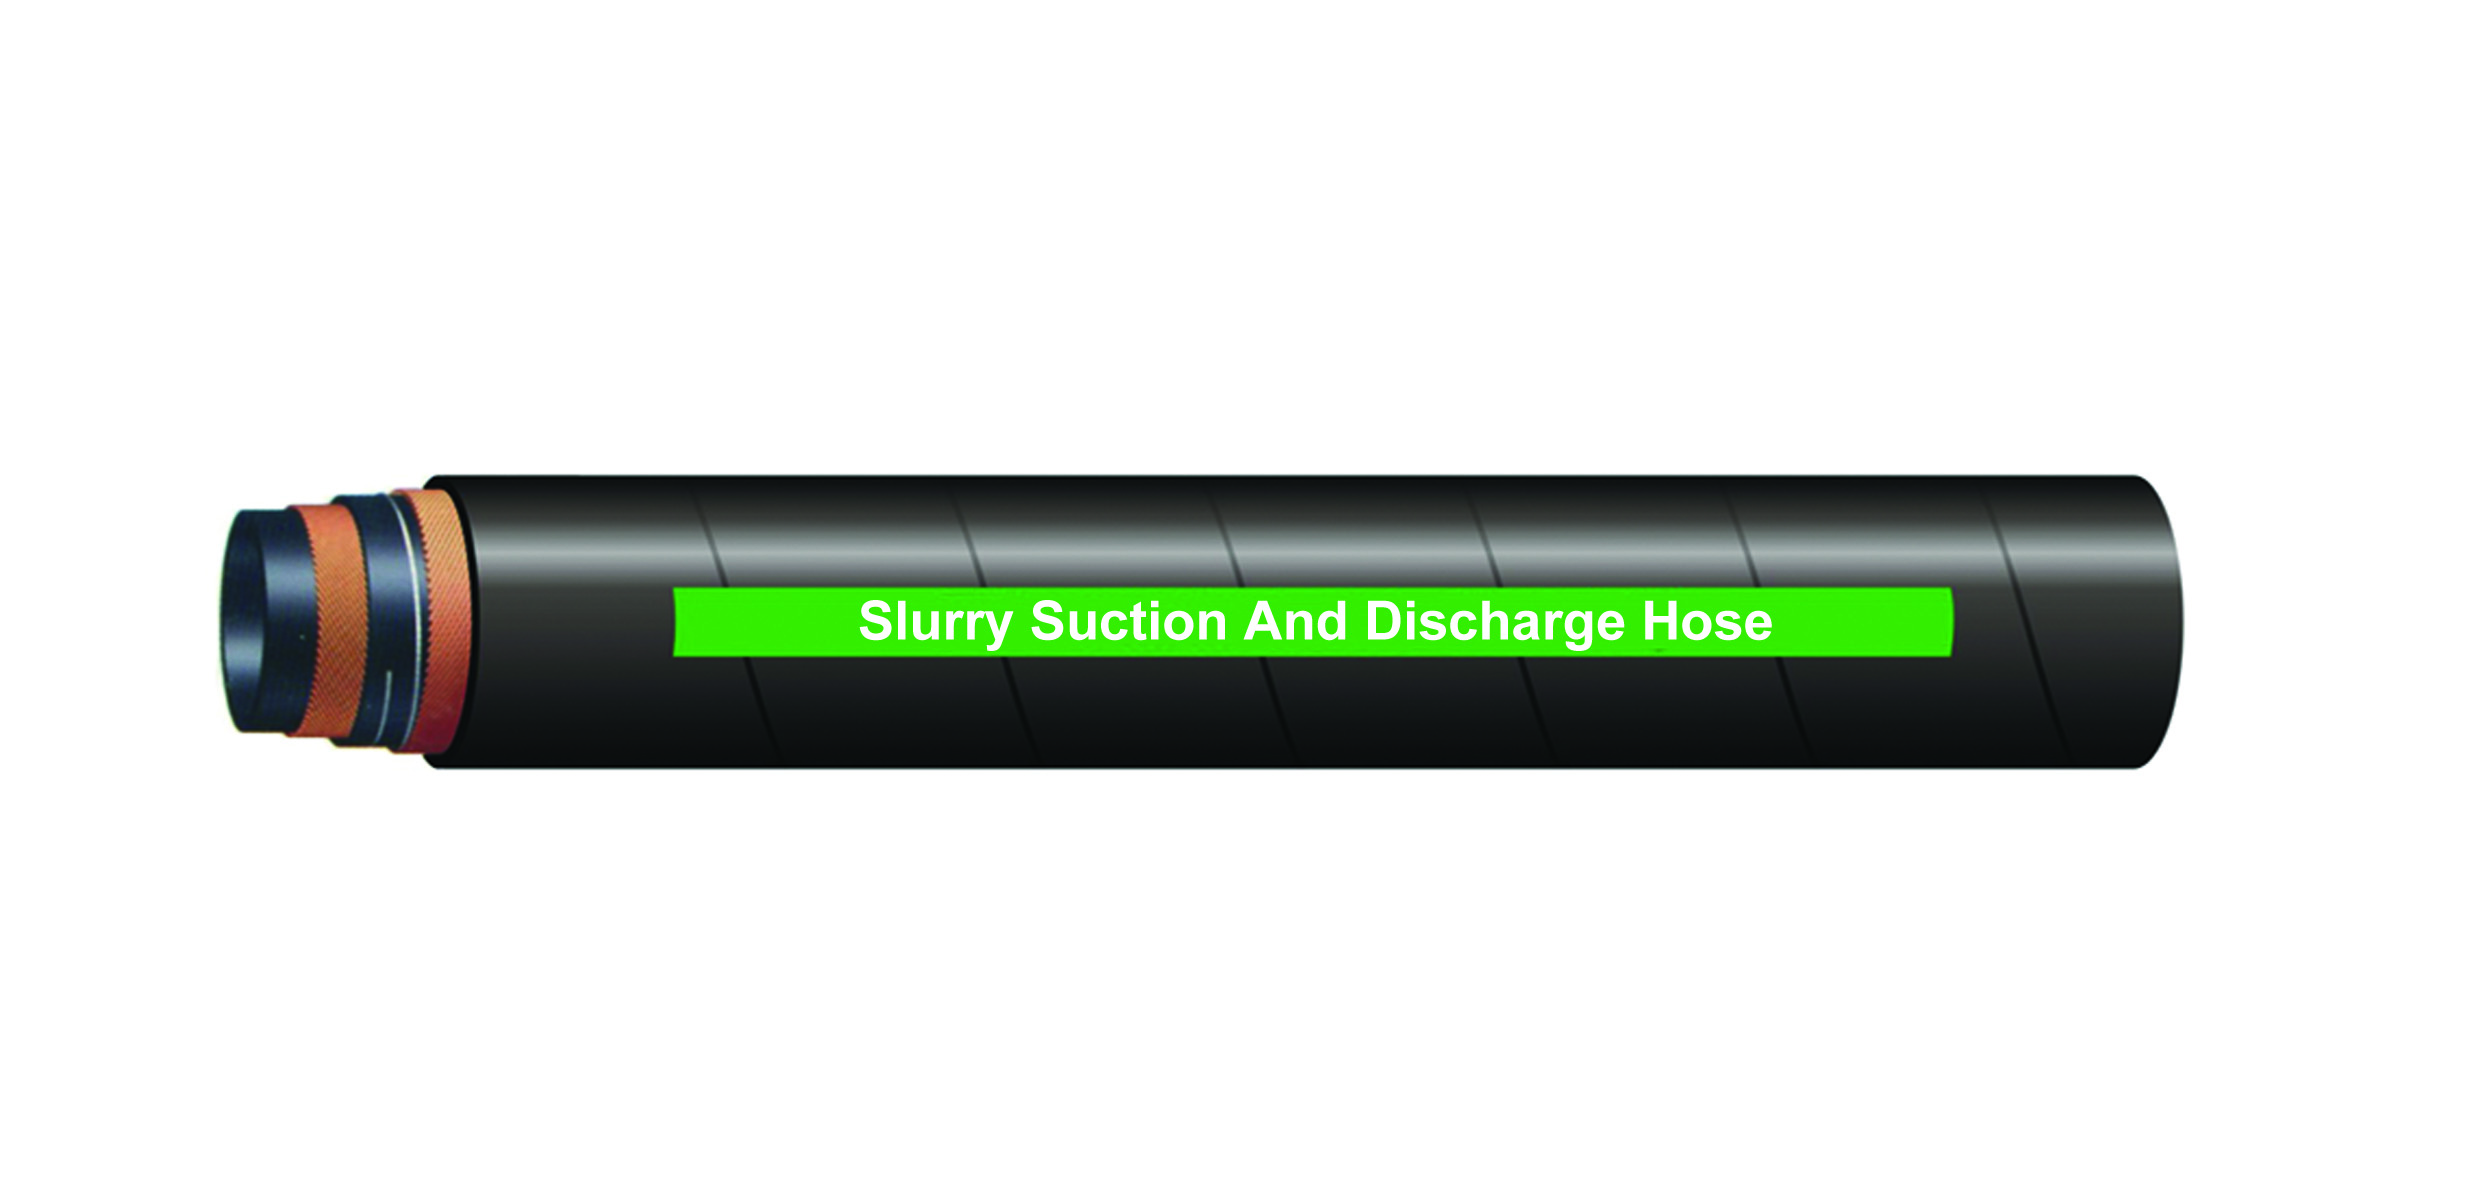 LUCOHOSE Slurry Suction And Discharge Hose